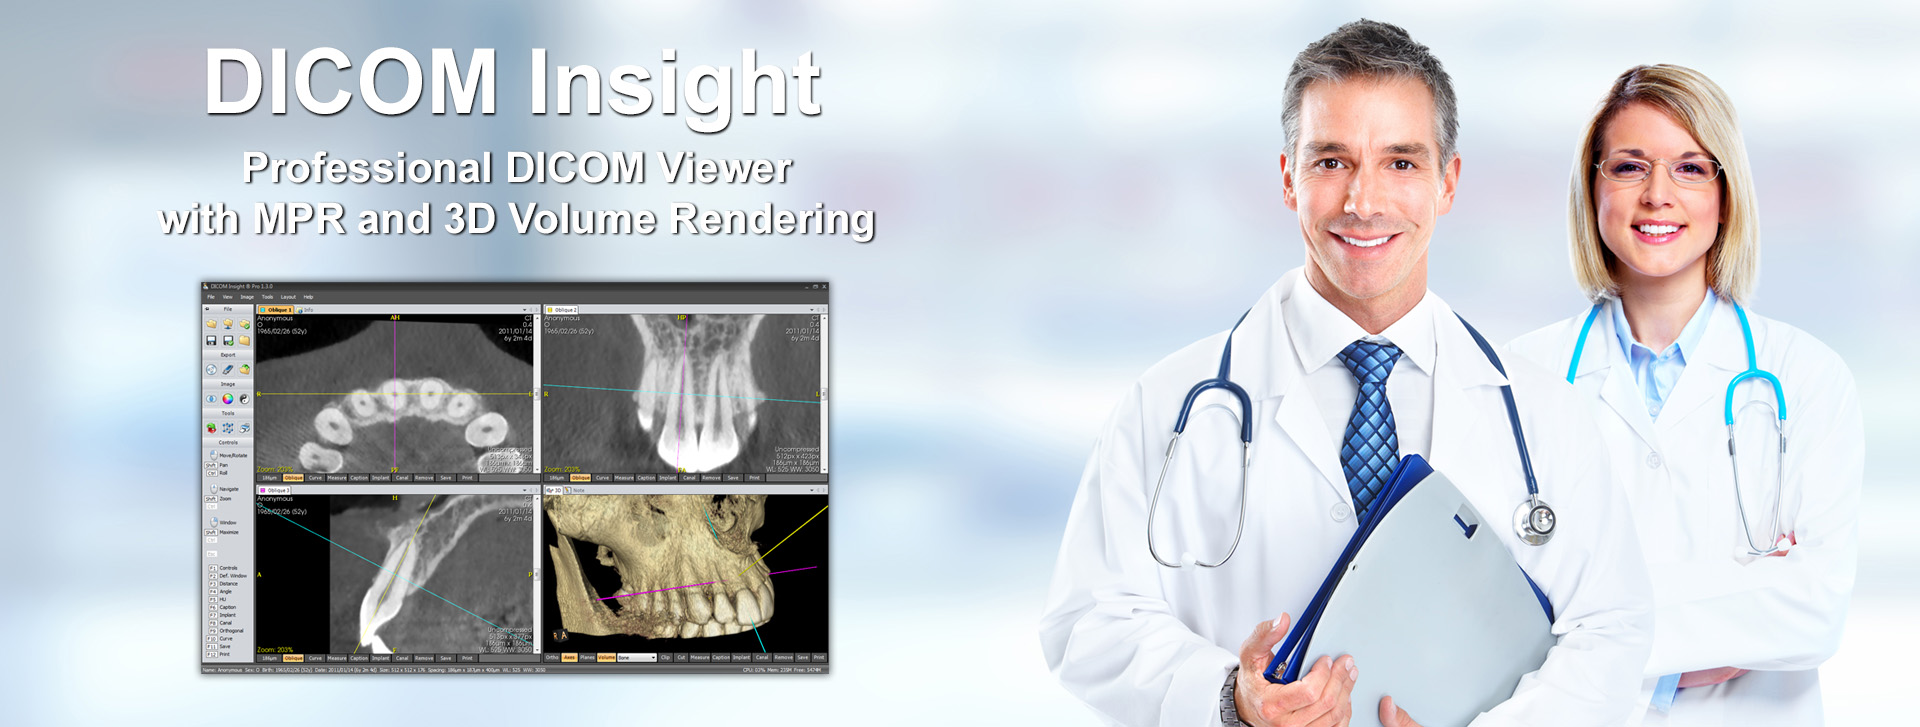 DICOM Insight - Professional DICOM Viewer with MPR and 3D Volume Rendering